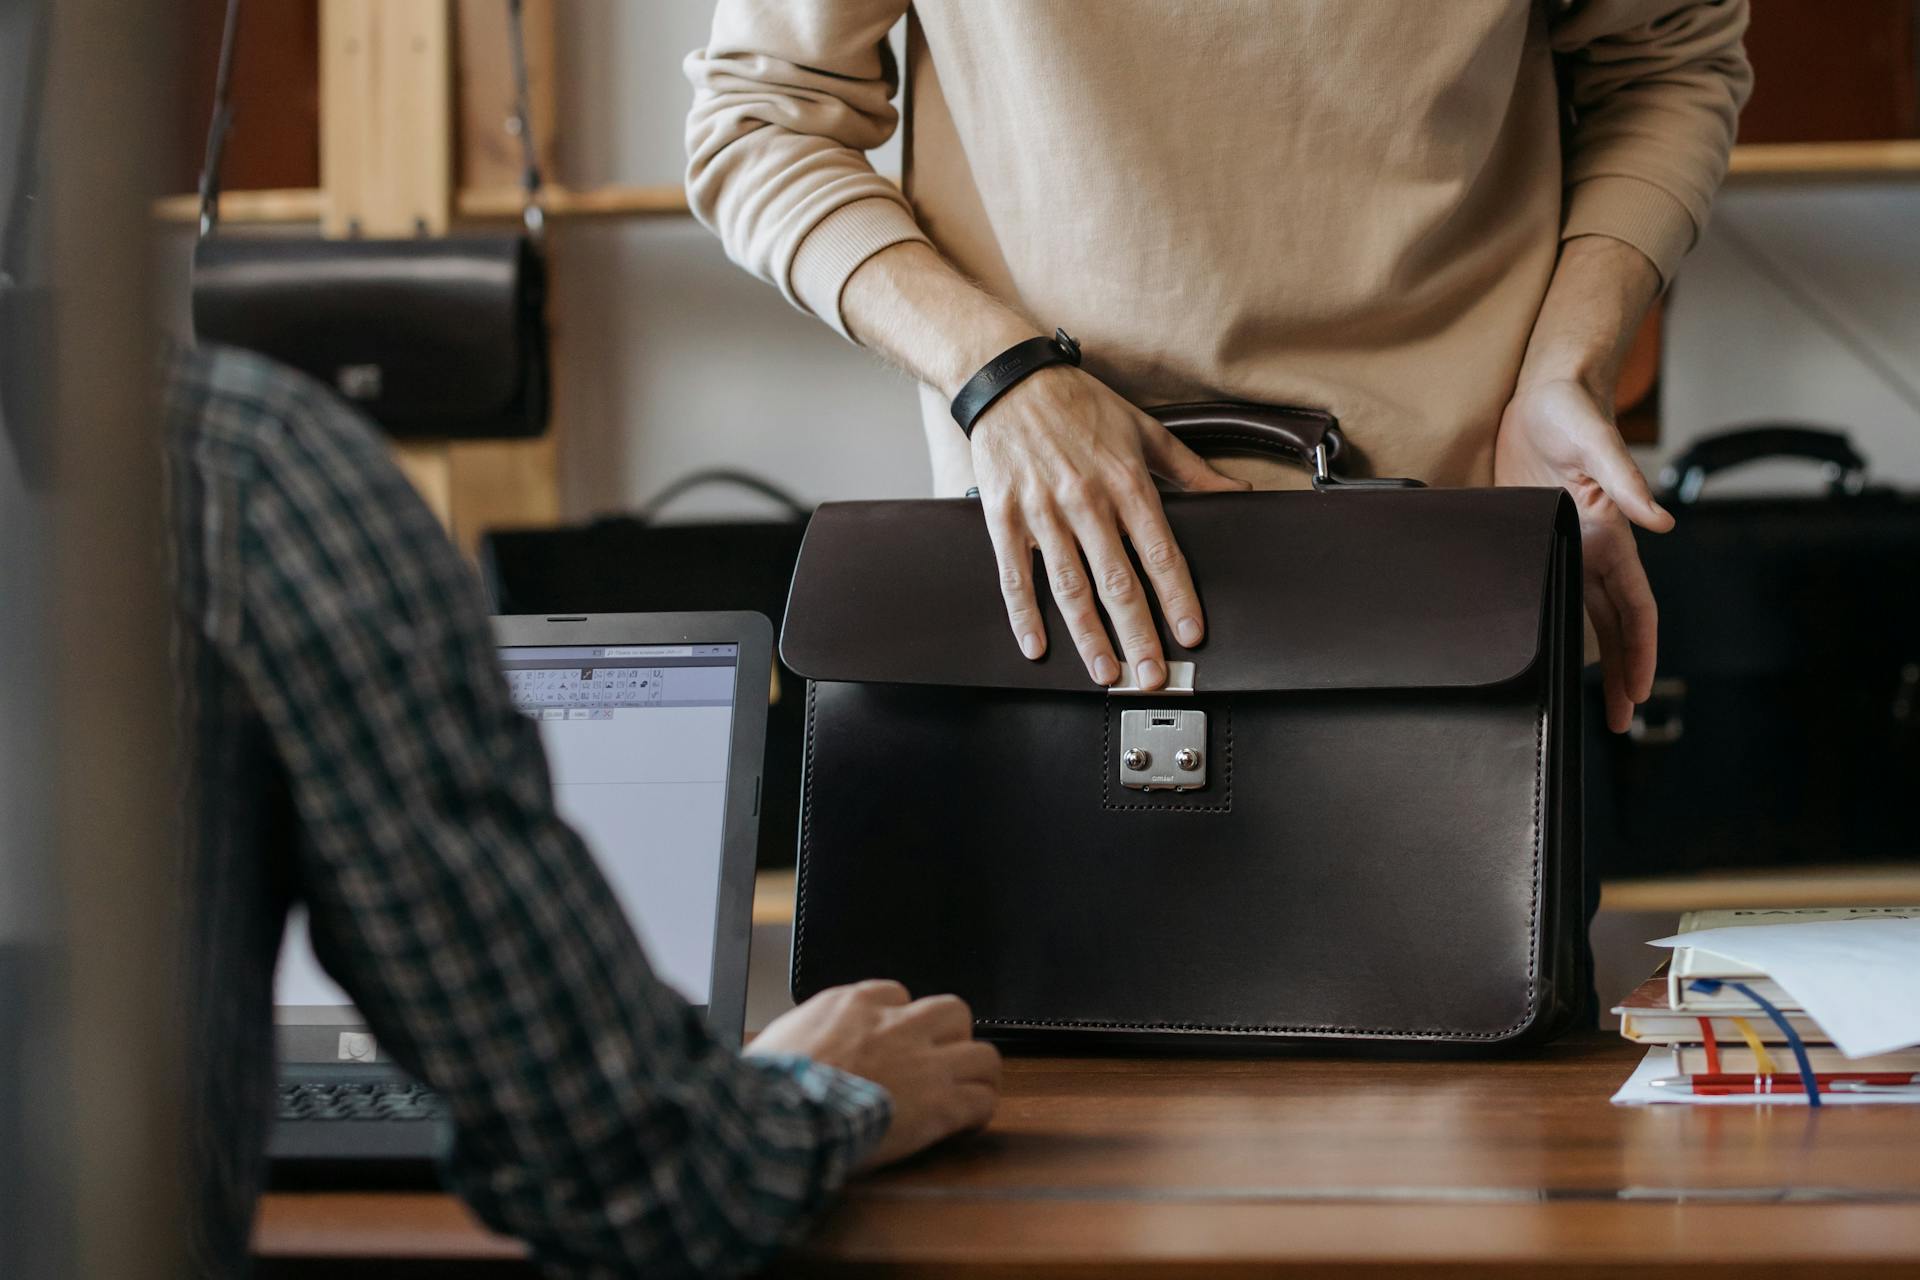 Man placing his black briefcase on the table | Source: Pexels